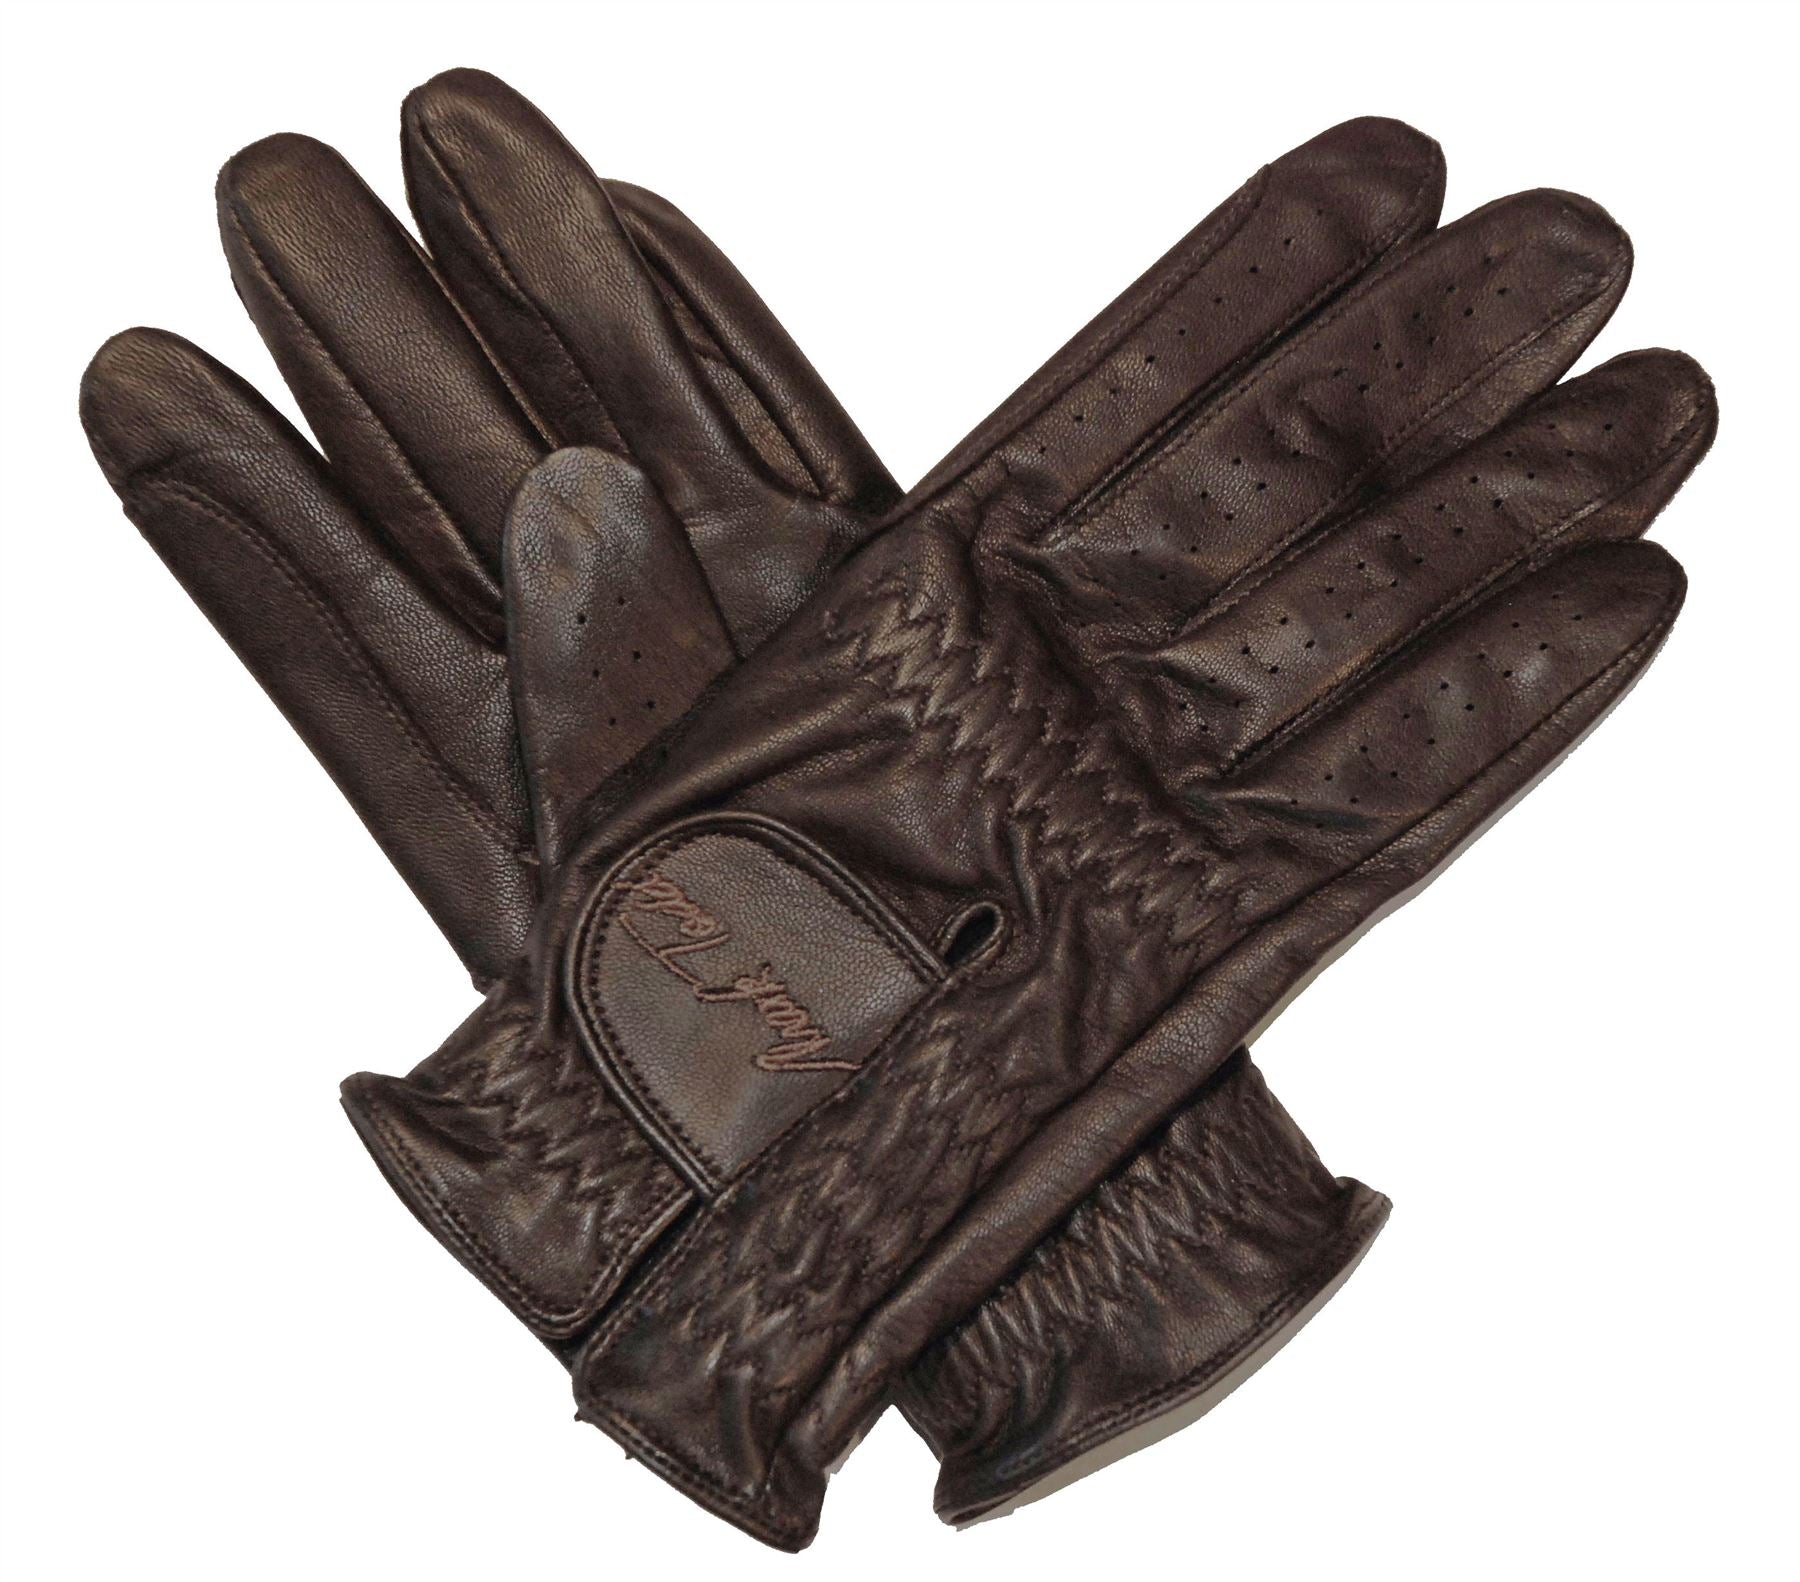 Mark Todd Leather Riding/Show Horse Riding Gloves - Just Horse Riders